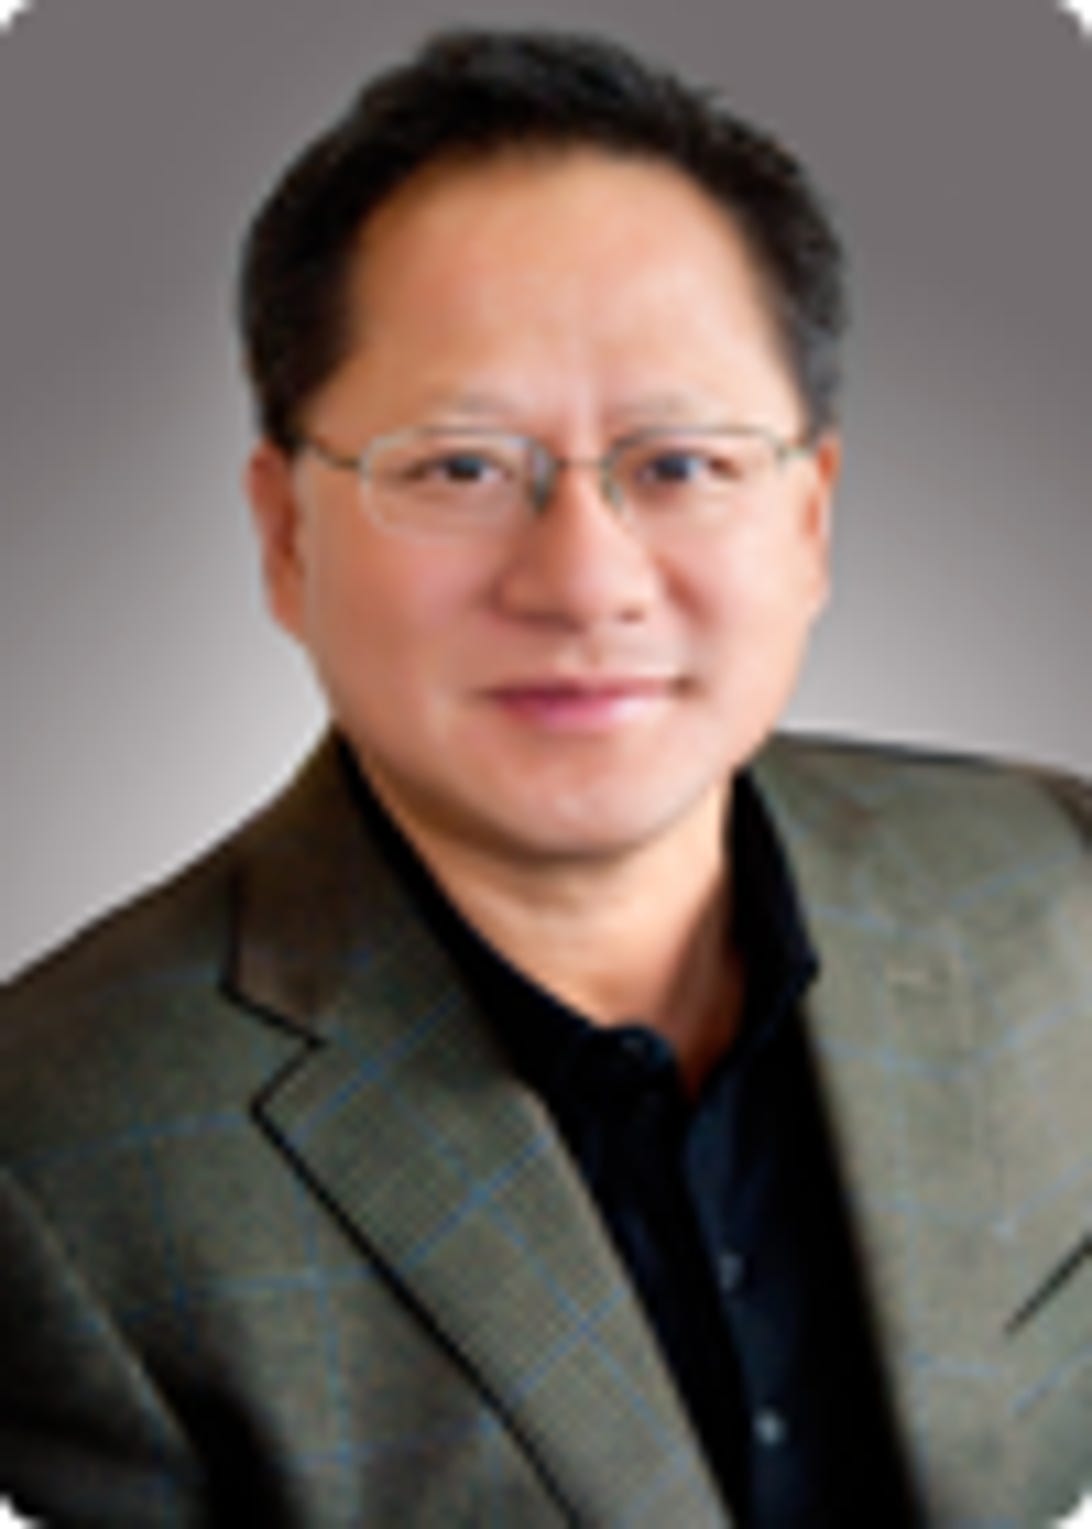 Nvidia CEO Jen-Hsun Huang reiterated today that ARM processors are the future.